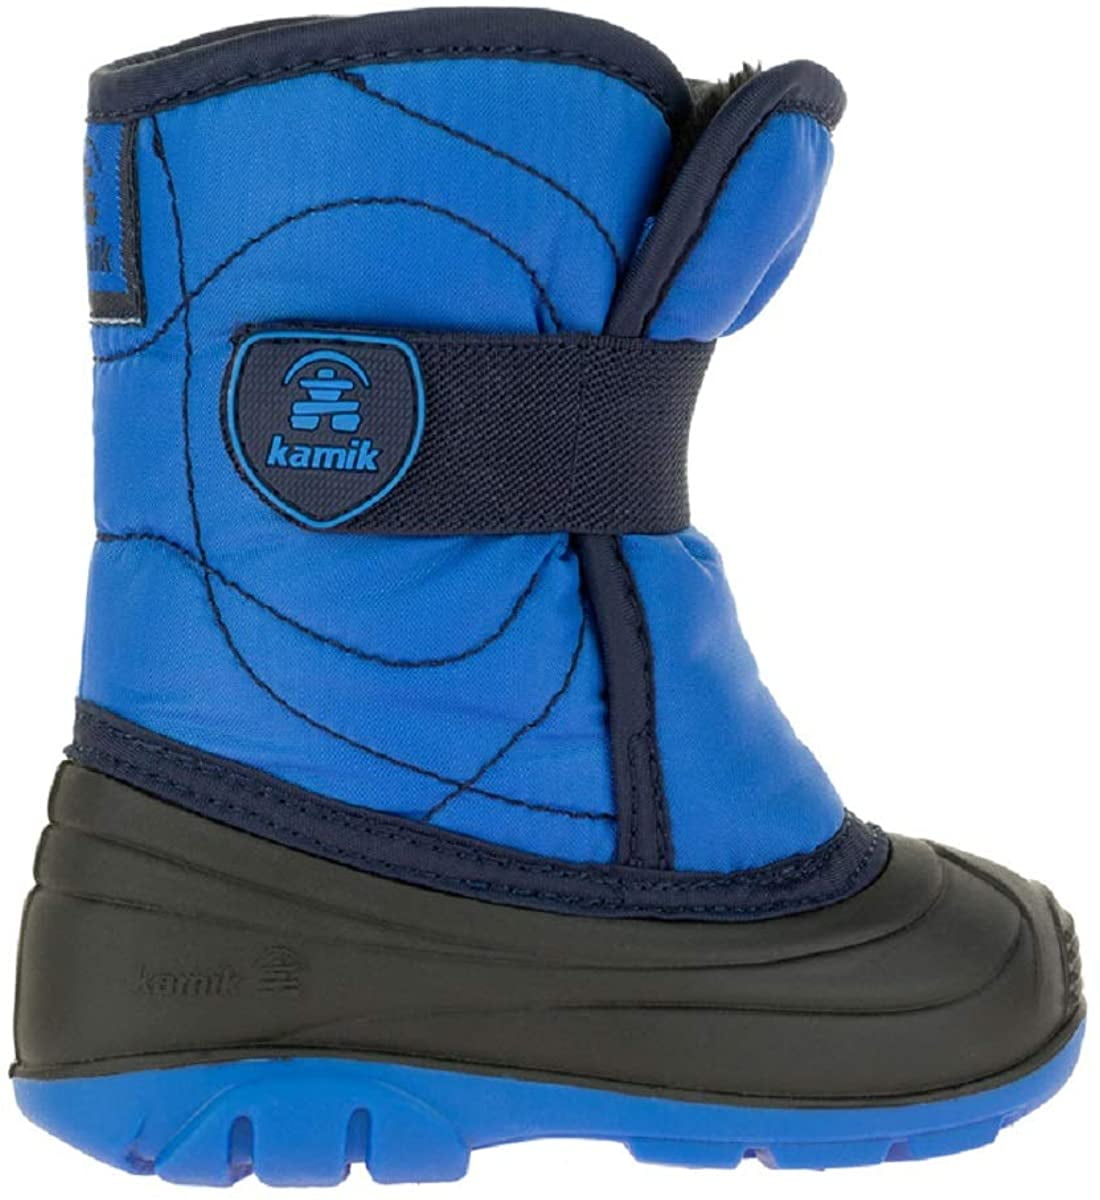 9-596A Kamik Snowbug3 Winter Boots Baby Toddler Size 5 Unisex Blue or Black 